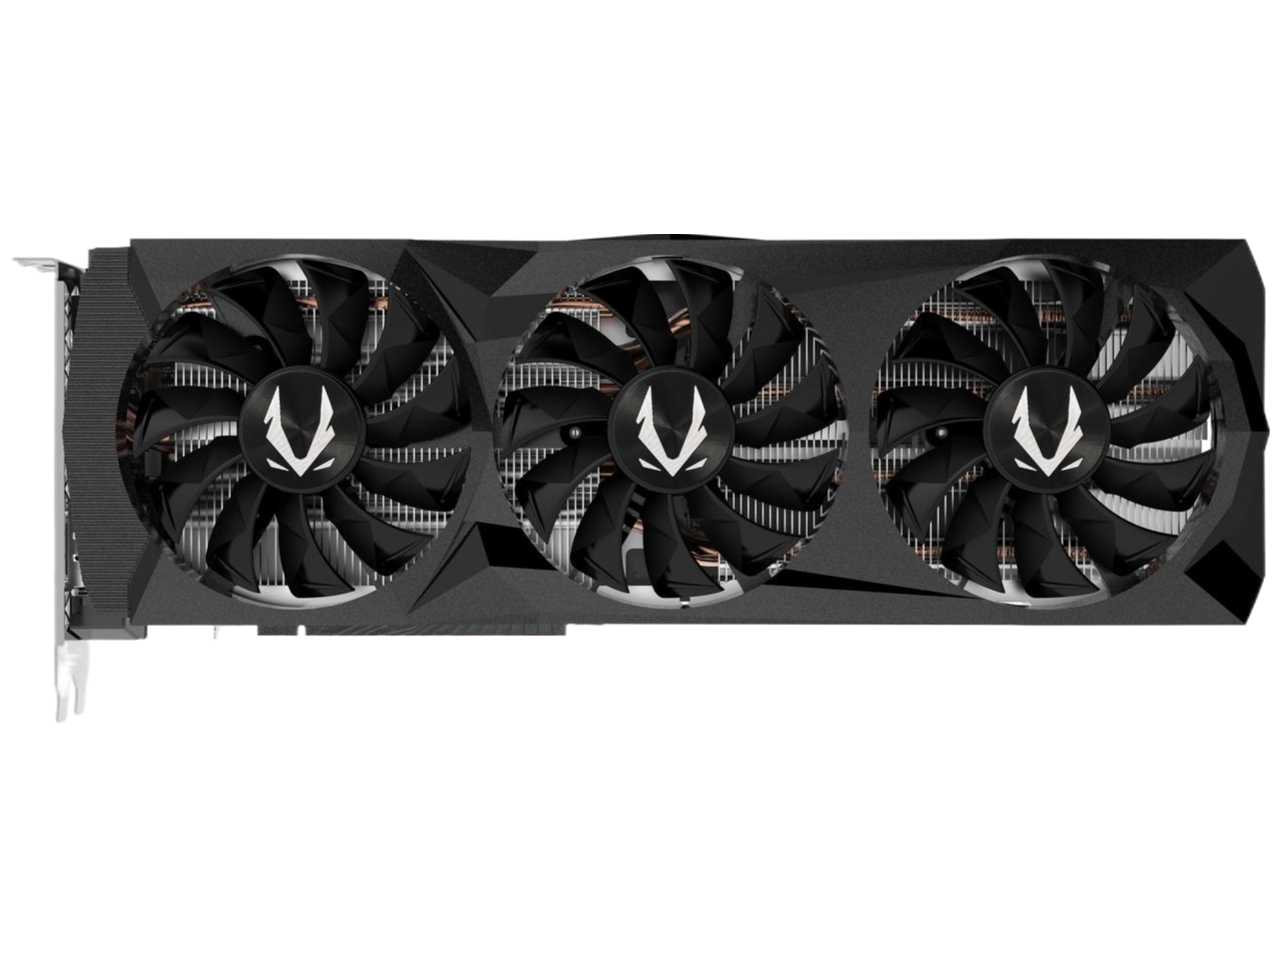 ZOTAC GAMING GeForce RTX 2080 AMP 8GB GDDR6 256-bit Gaming Graphics Card Active Fan Control Metal Backplate Spectra Lighting ZT-T20800D-10P